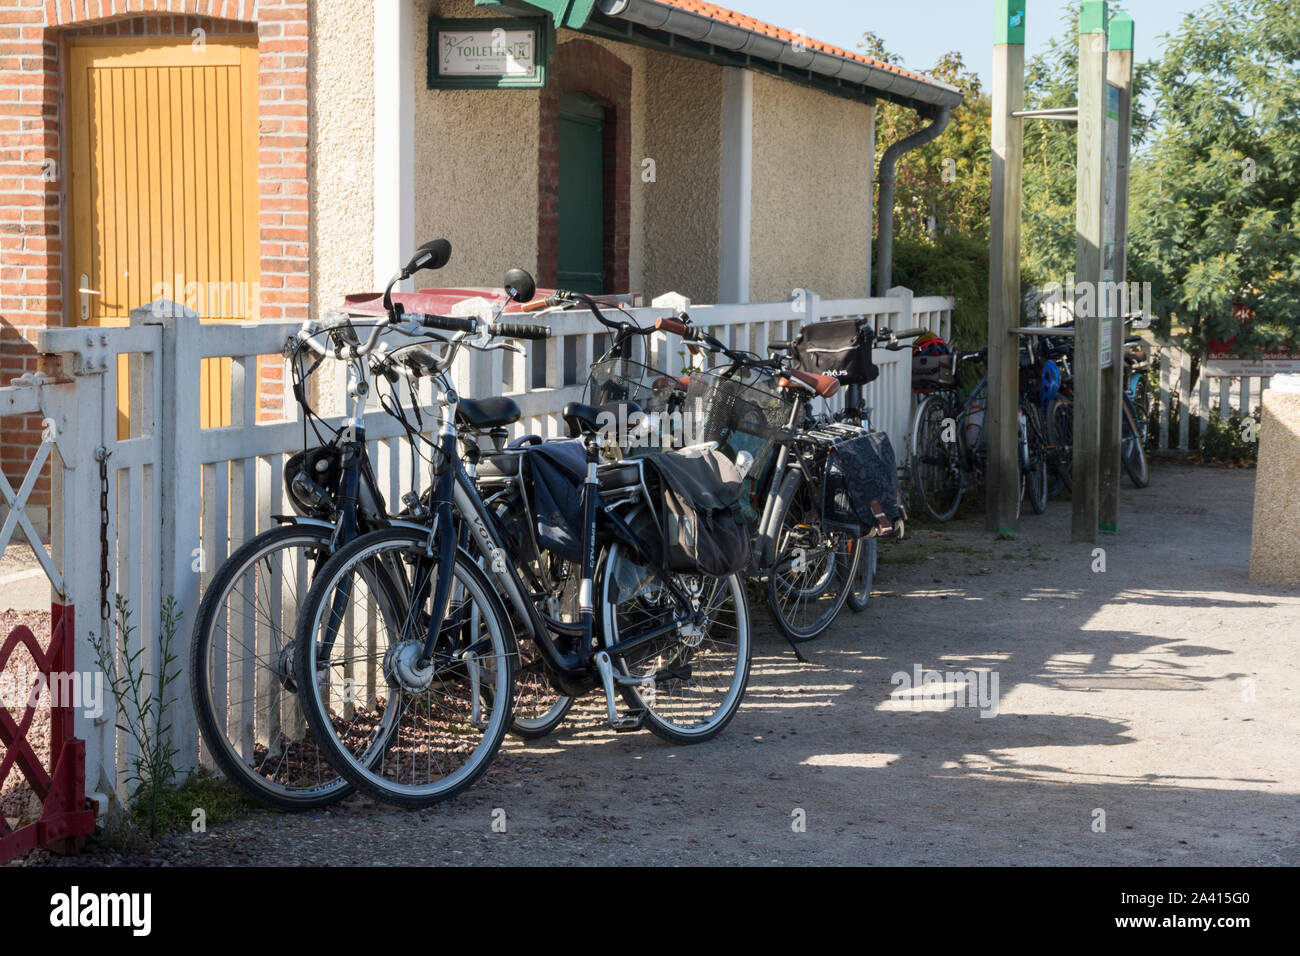 Le Crotoy, Picardy, France, cycles tied up at the station, Chemin de Fer de la Baie de Somme, electric cycles Stock Photo